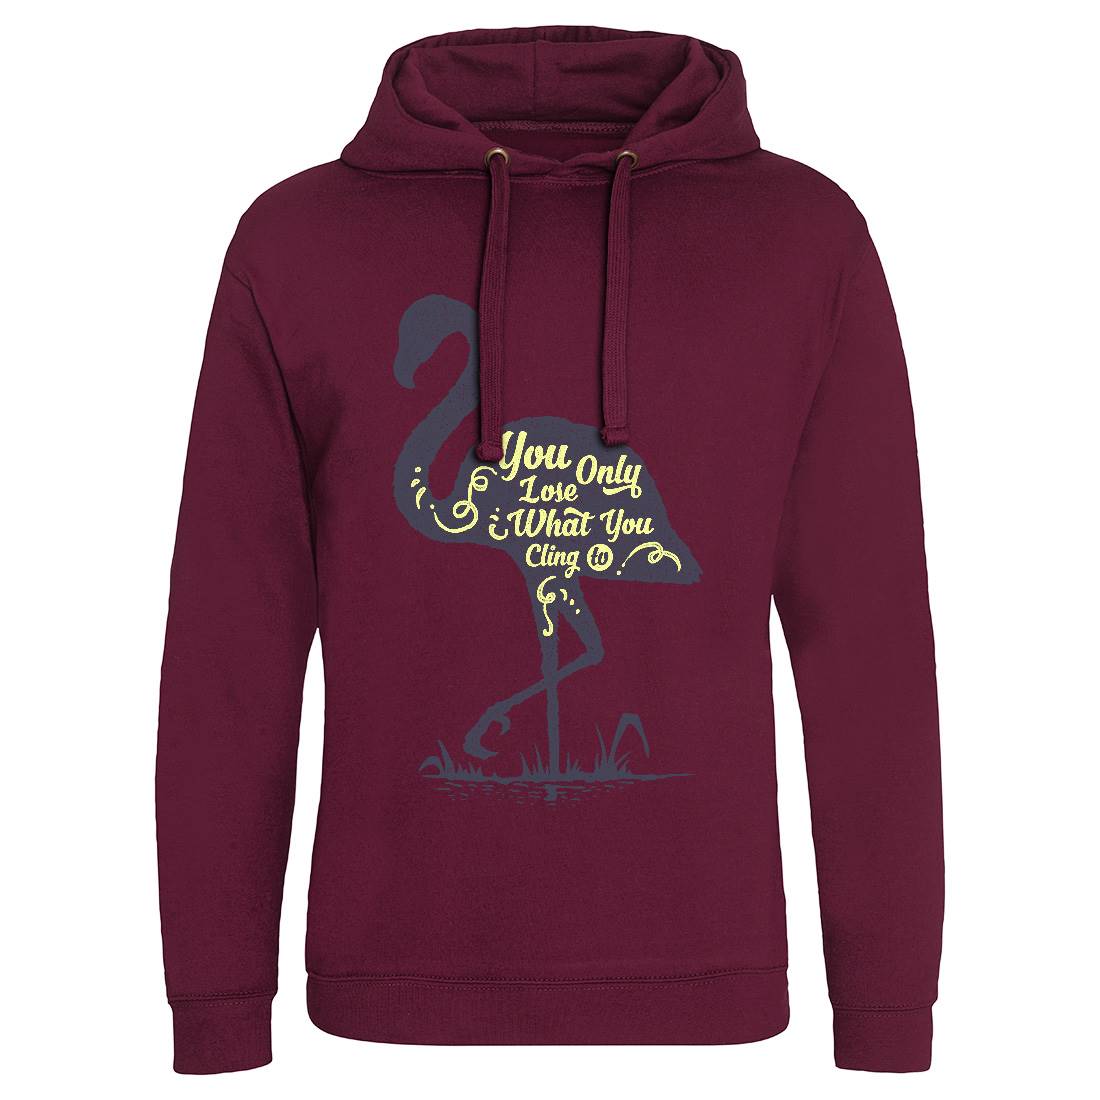 You Only Lose Mens Hoodie Without Pocket Quotes A395